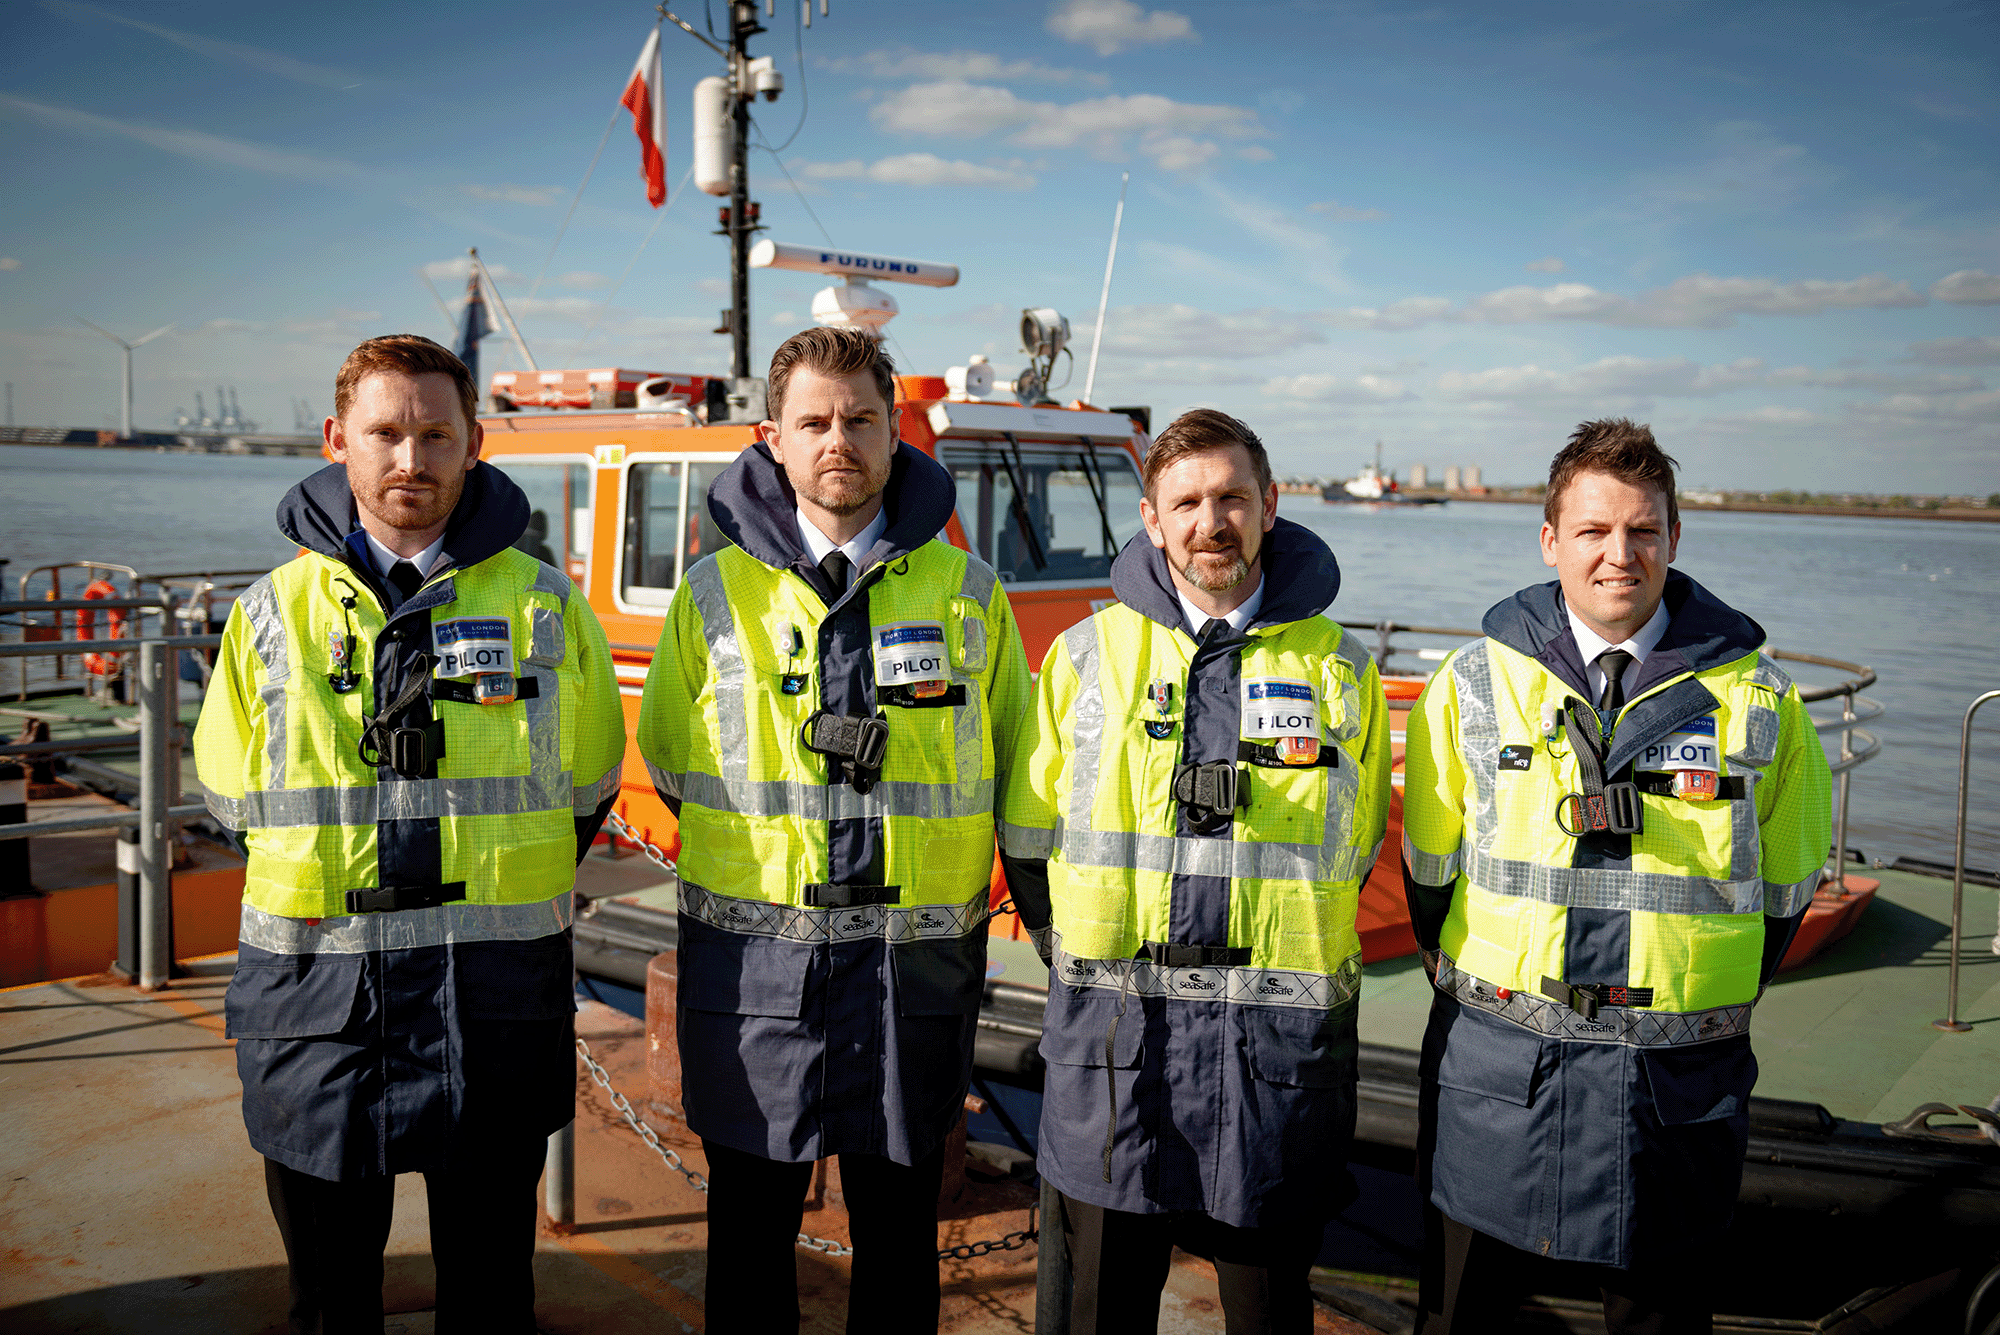 New trainee pilots to support Thames pilotage demand